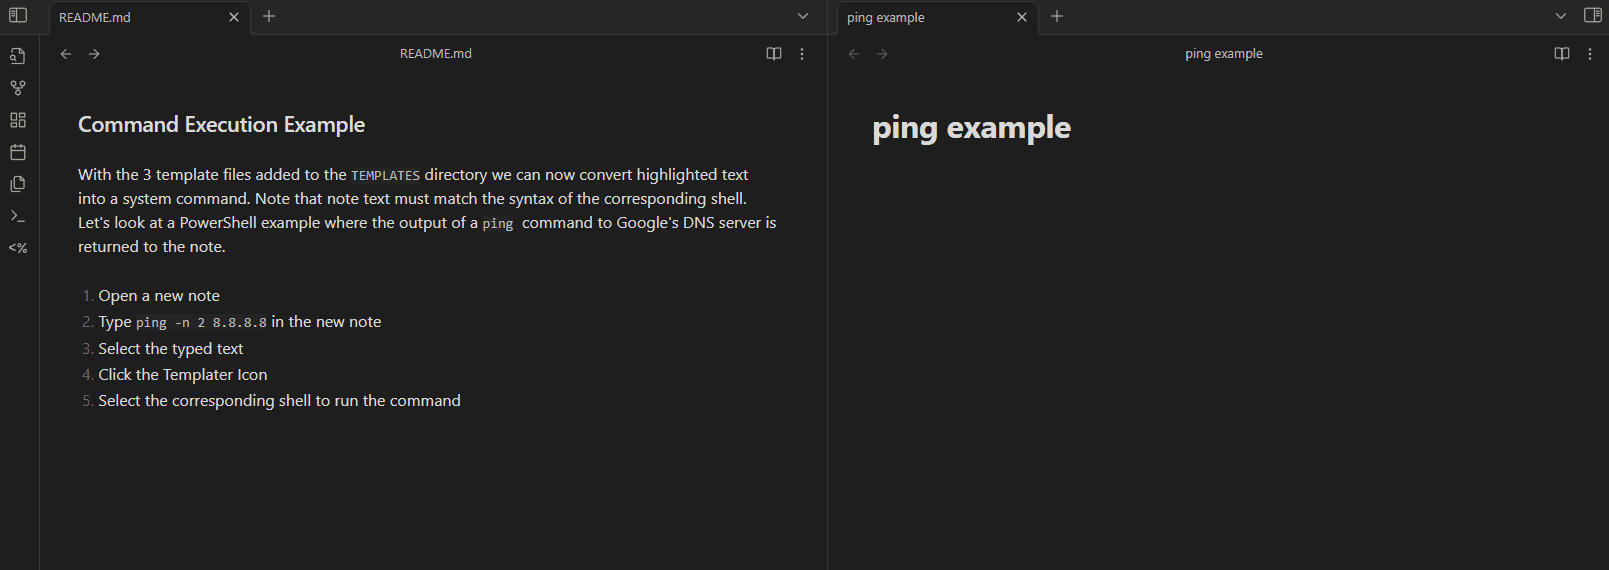 ping_example.gif